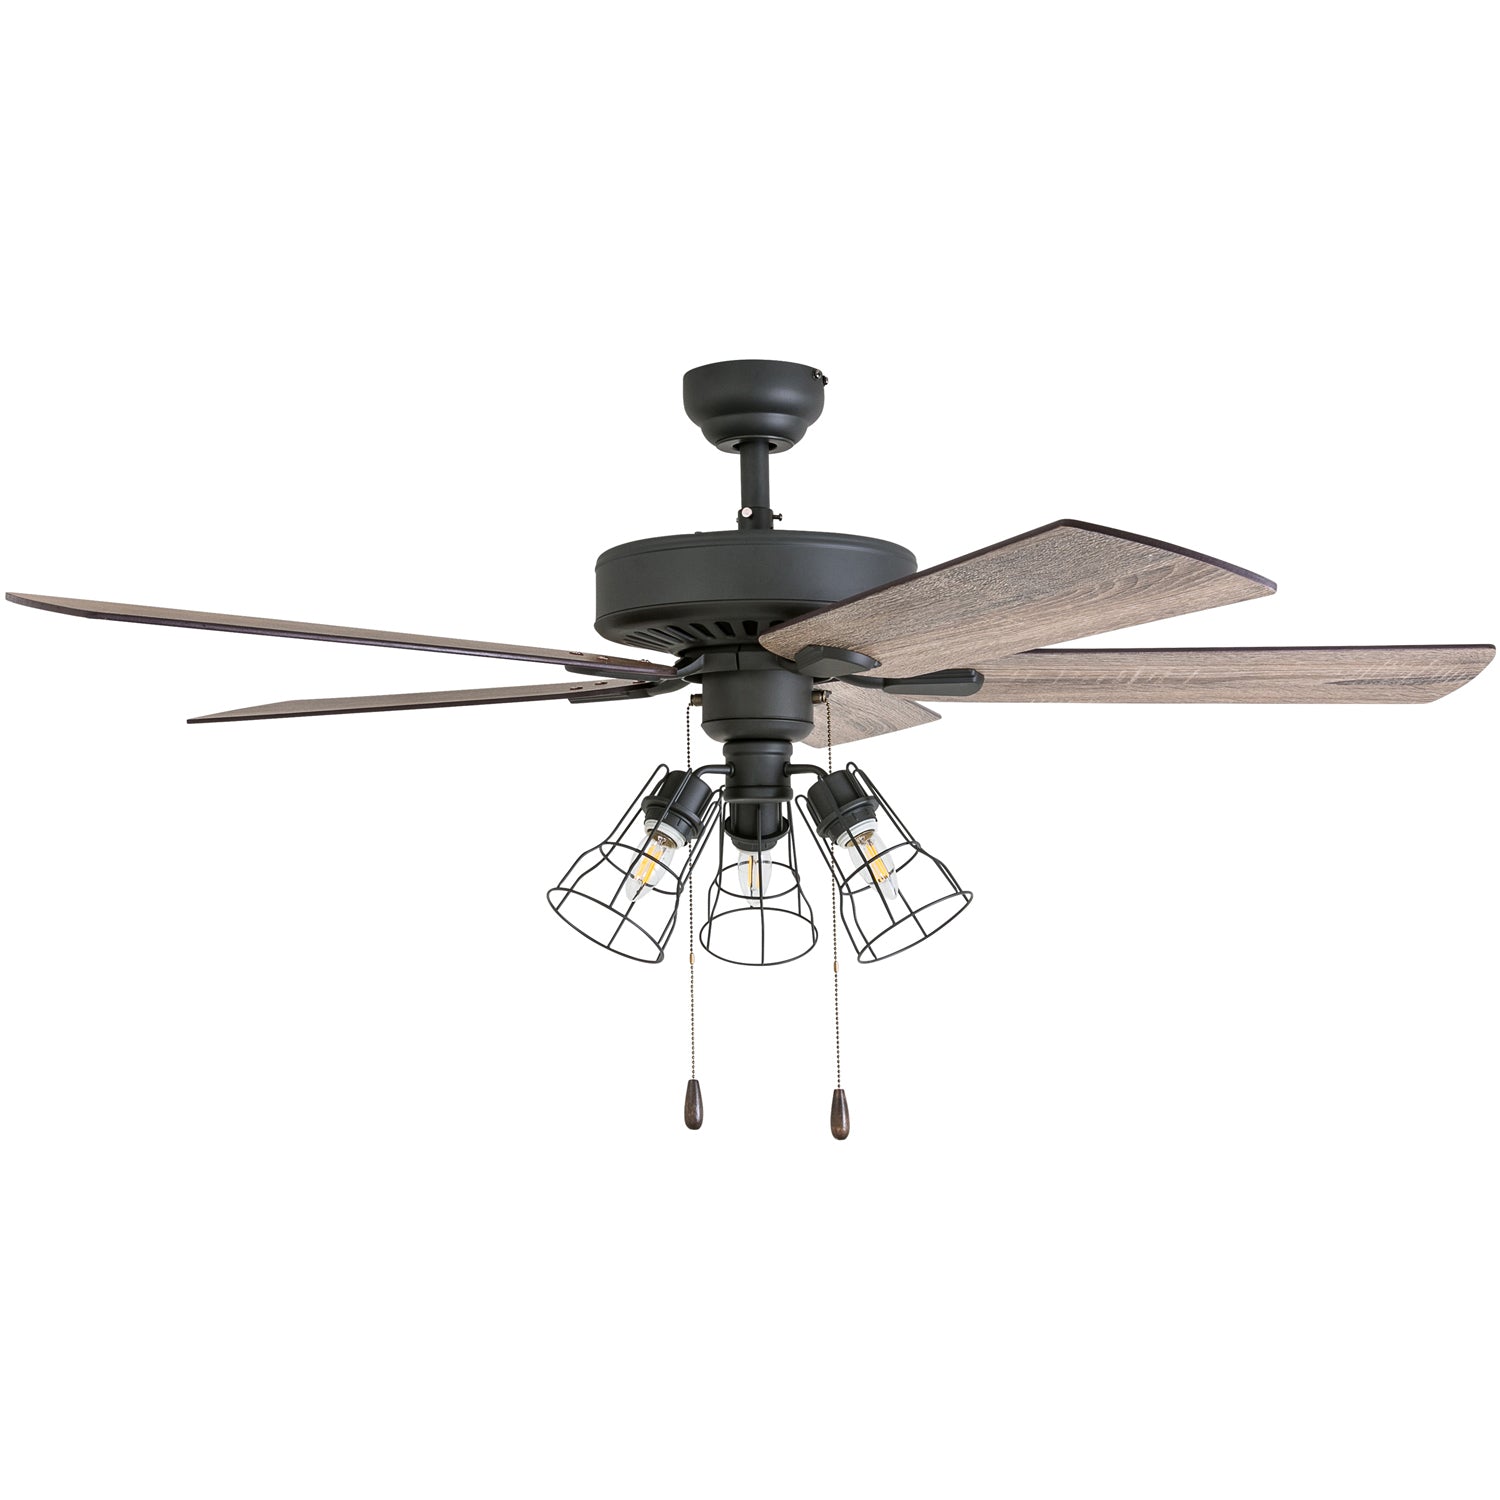 52 Inch Inland Seas, Bronze, Pull Chain, Ceiling Fan by Prominence Home